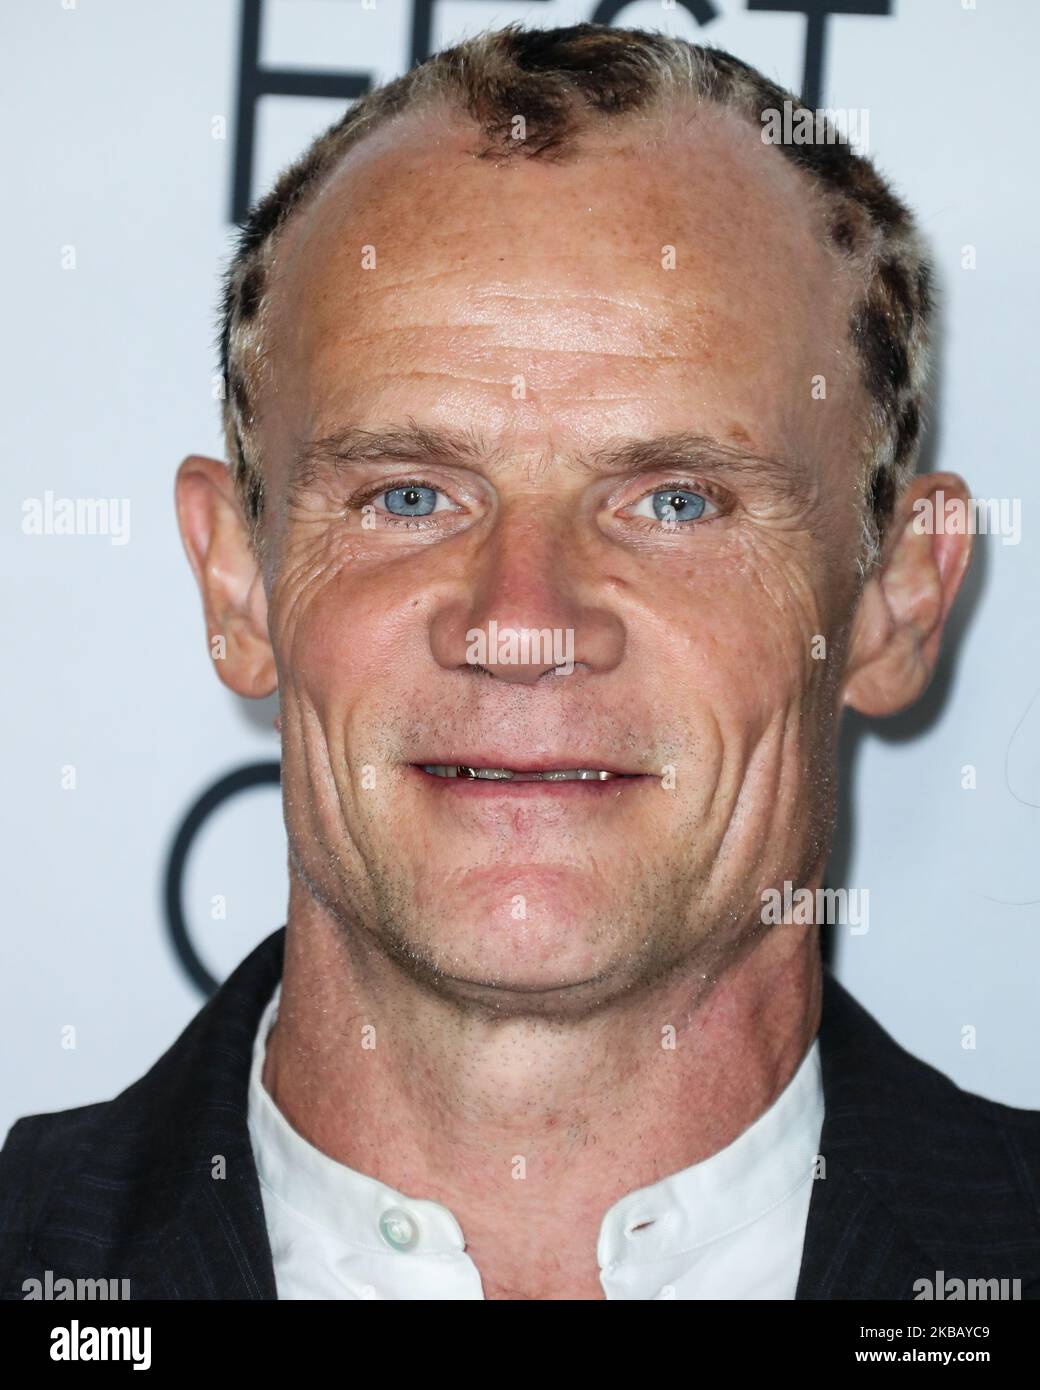 HOLLYWOOD, LOS ANGELES, CALIFORNIA, USA - NOVEMBER 14: Flea arrives at the AFI FEST 2019 - Opening Night Gala - Premiere Of Universal Pictures' 'Queen And Slim' held at the TCL Chinese Theatre IMAX on November 14, 2019 in Hollywood, Los Angeles, California, United States. (Photo by Xavier Collin/Image Press Agency/NurPhoto) Stock Photo